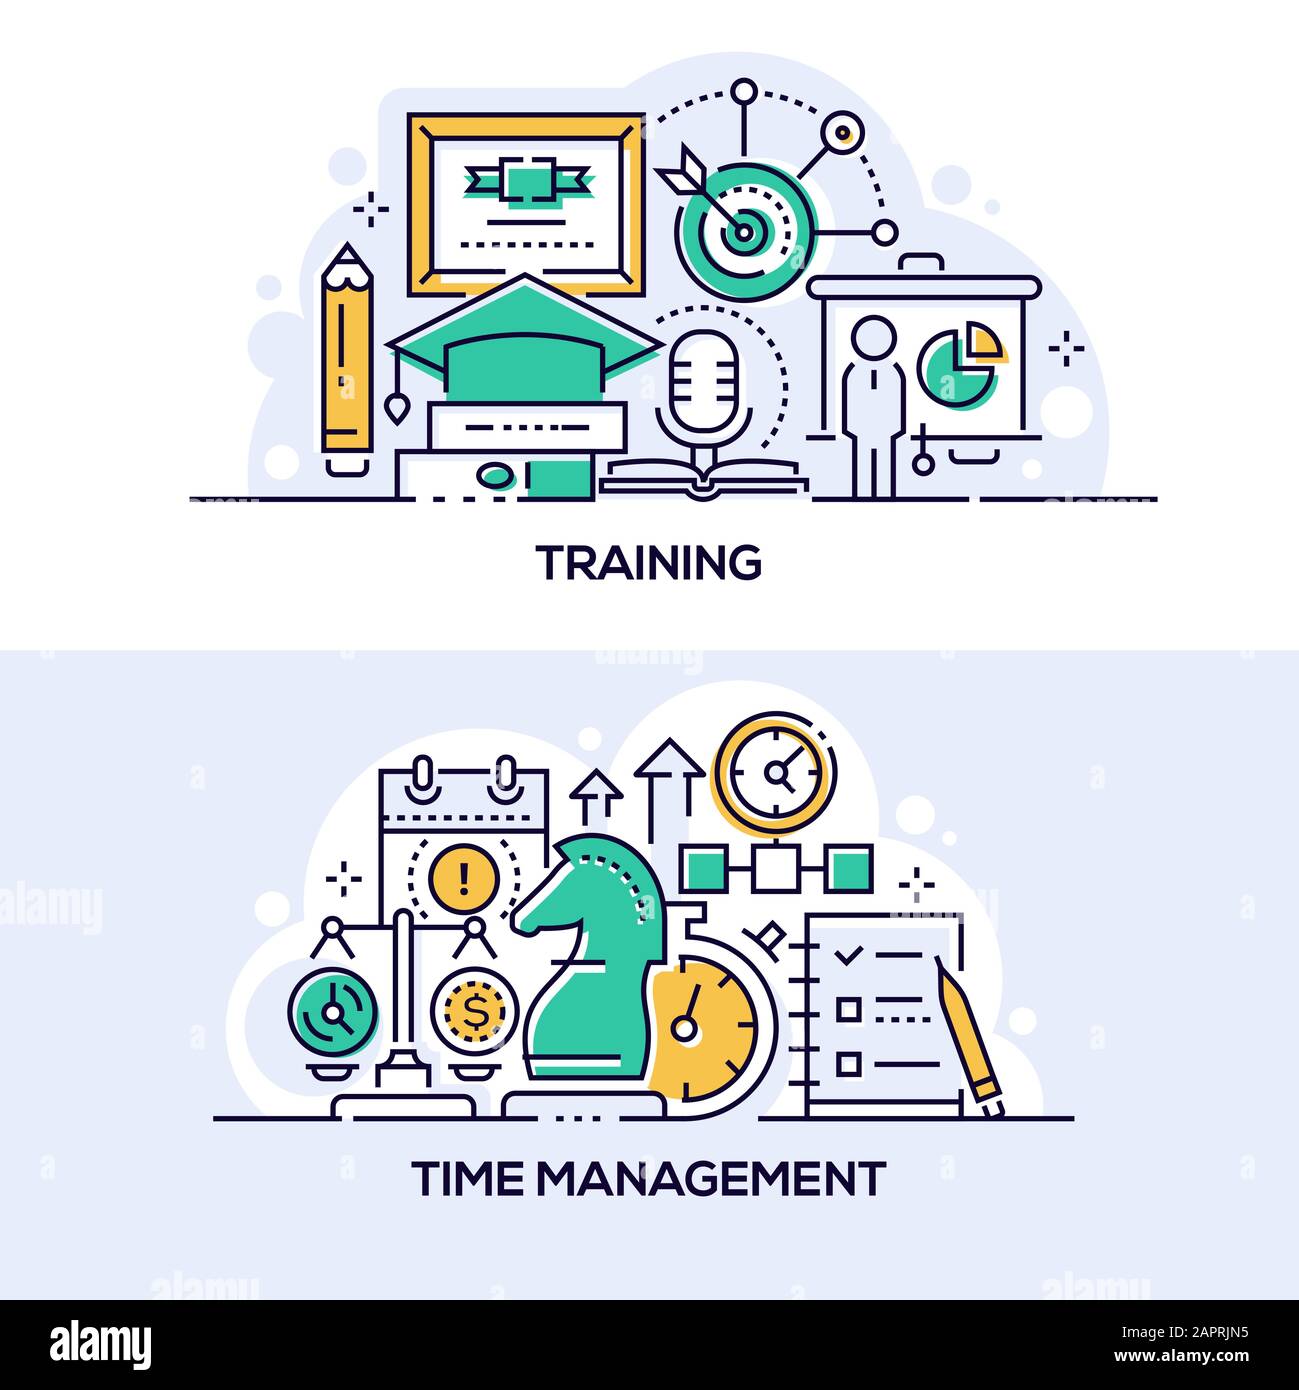 Training and time management banner templates set Stock Vector